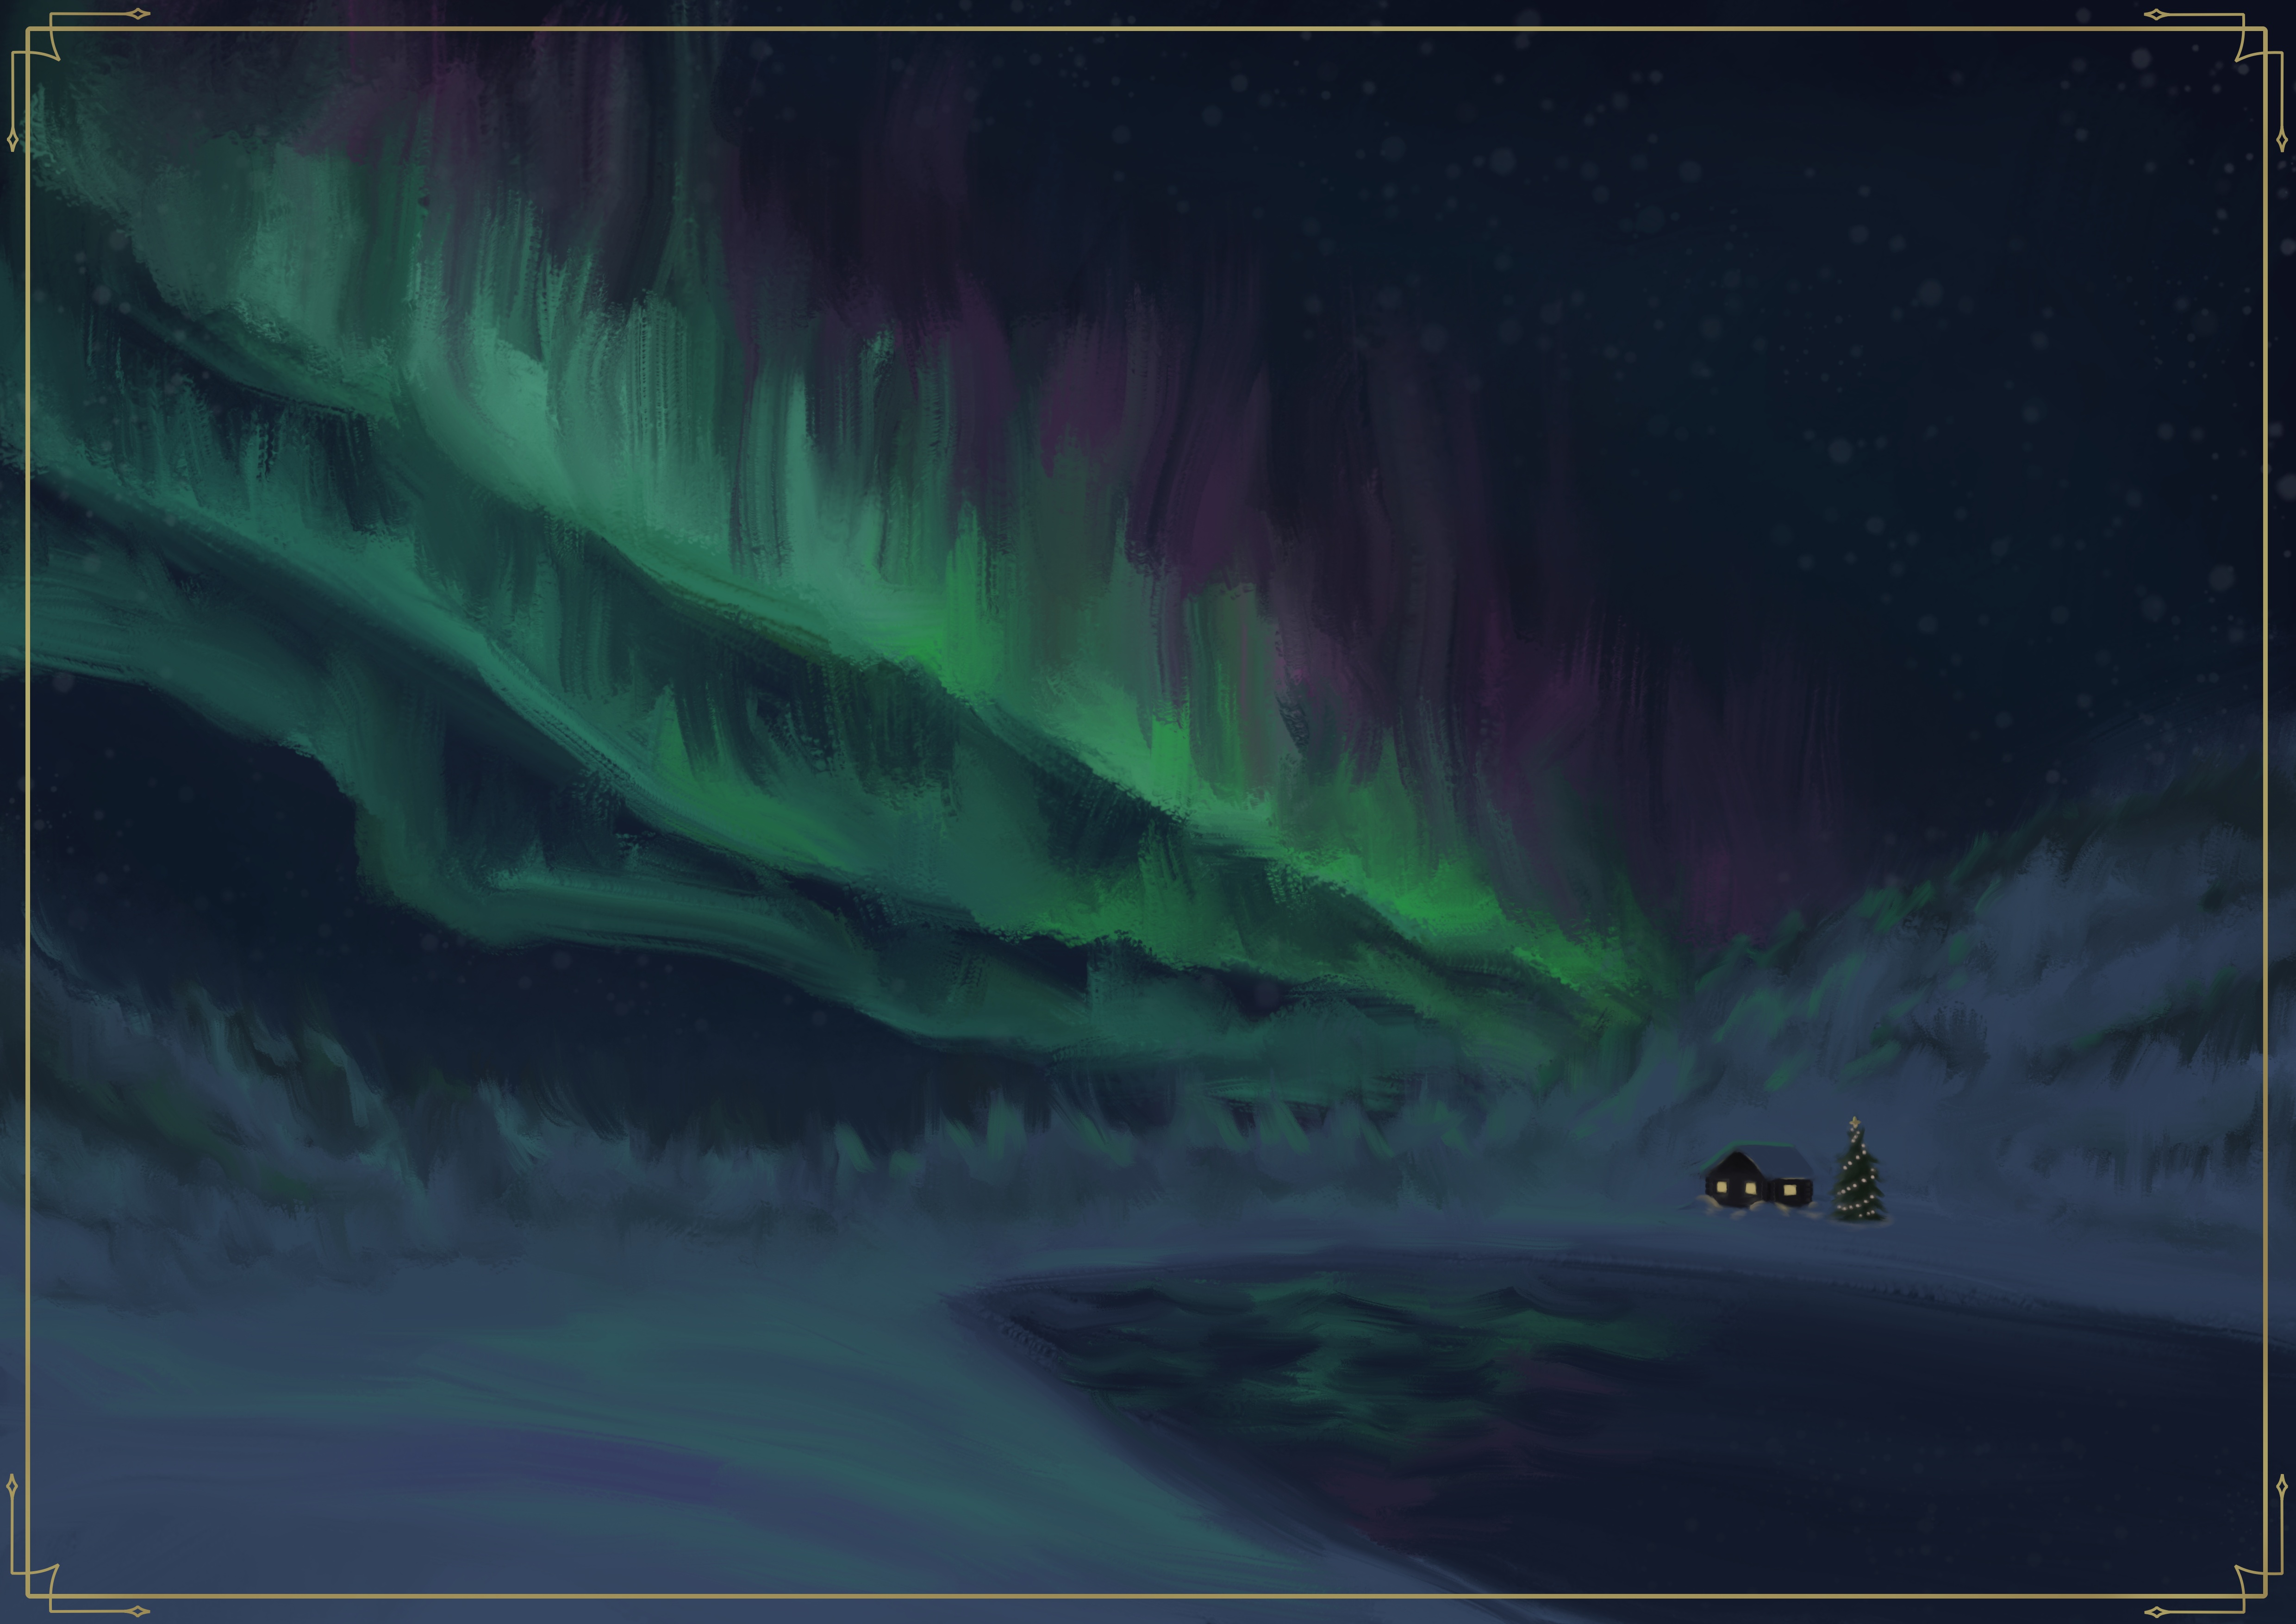 Digital painting of a snowy forest landscape at night with
northern lights in the sky. The lights converge at a little snow-covered log
cabin with a warm light in the windows and a christmas tree in the yard.